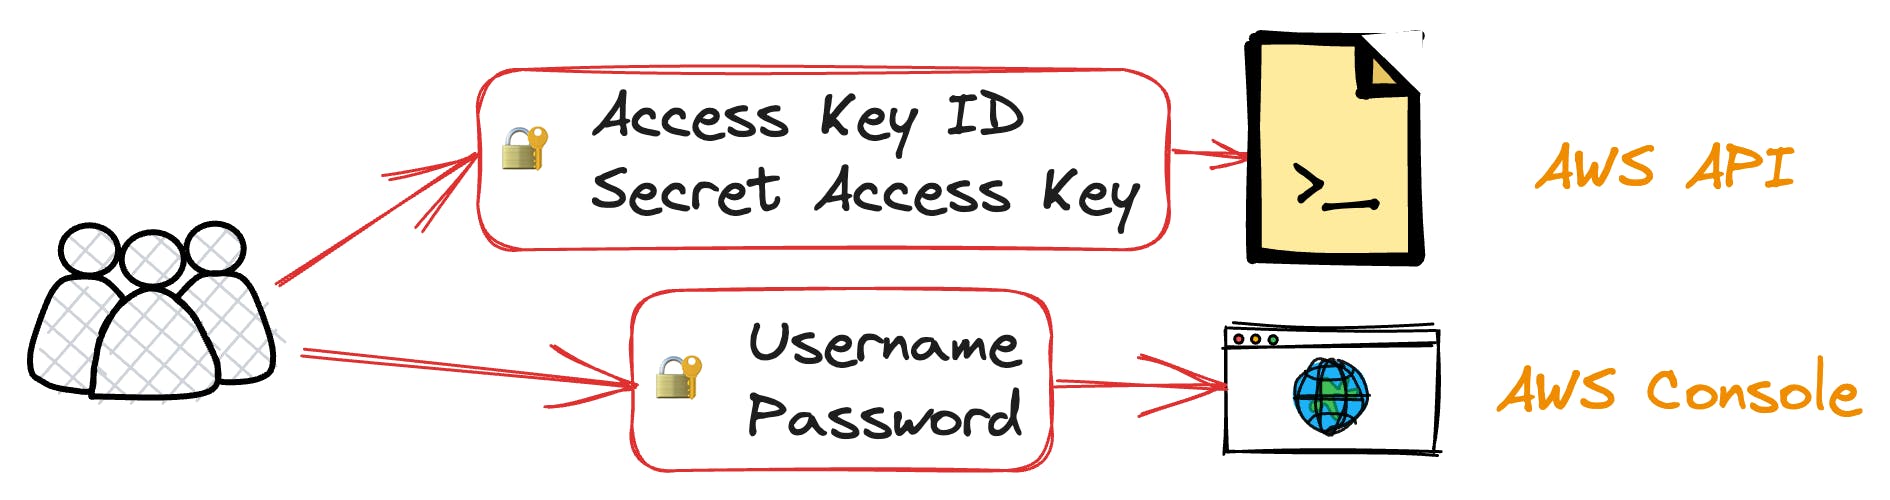 Using AWS either via username and password or programmatically via Access Key ID and Secret Access Key.